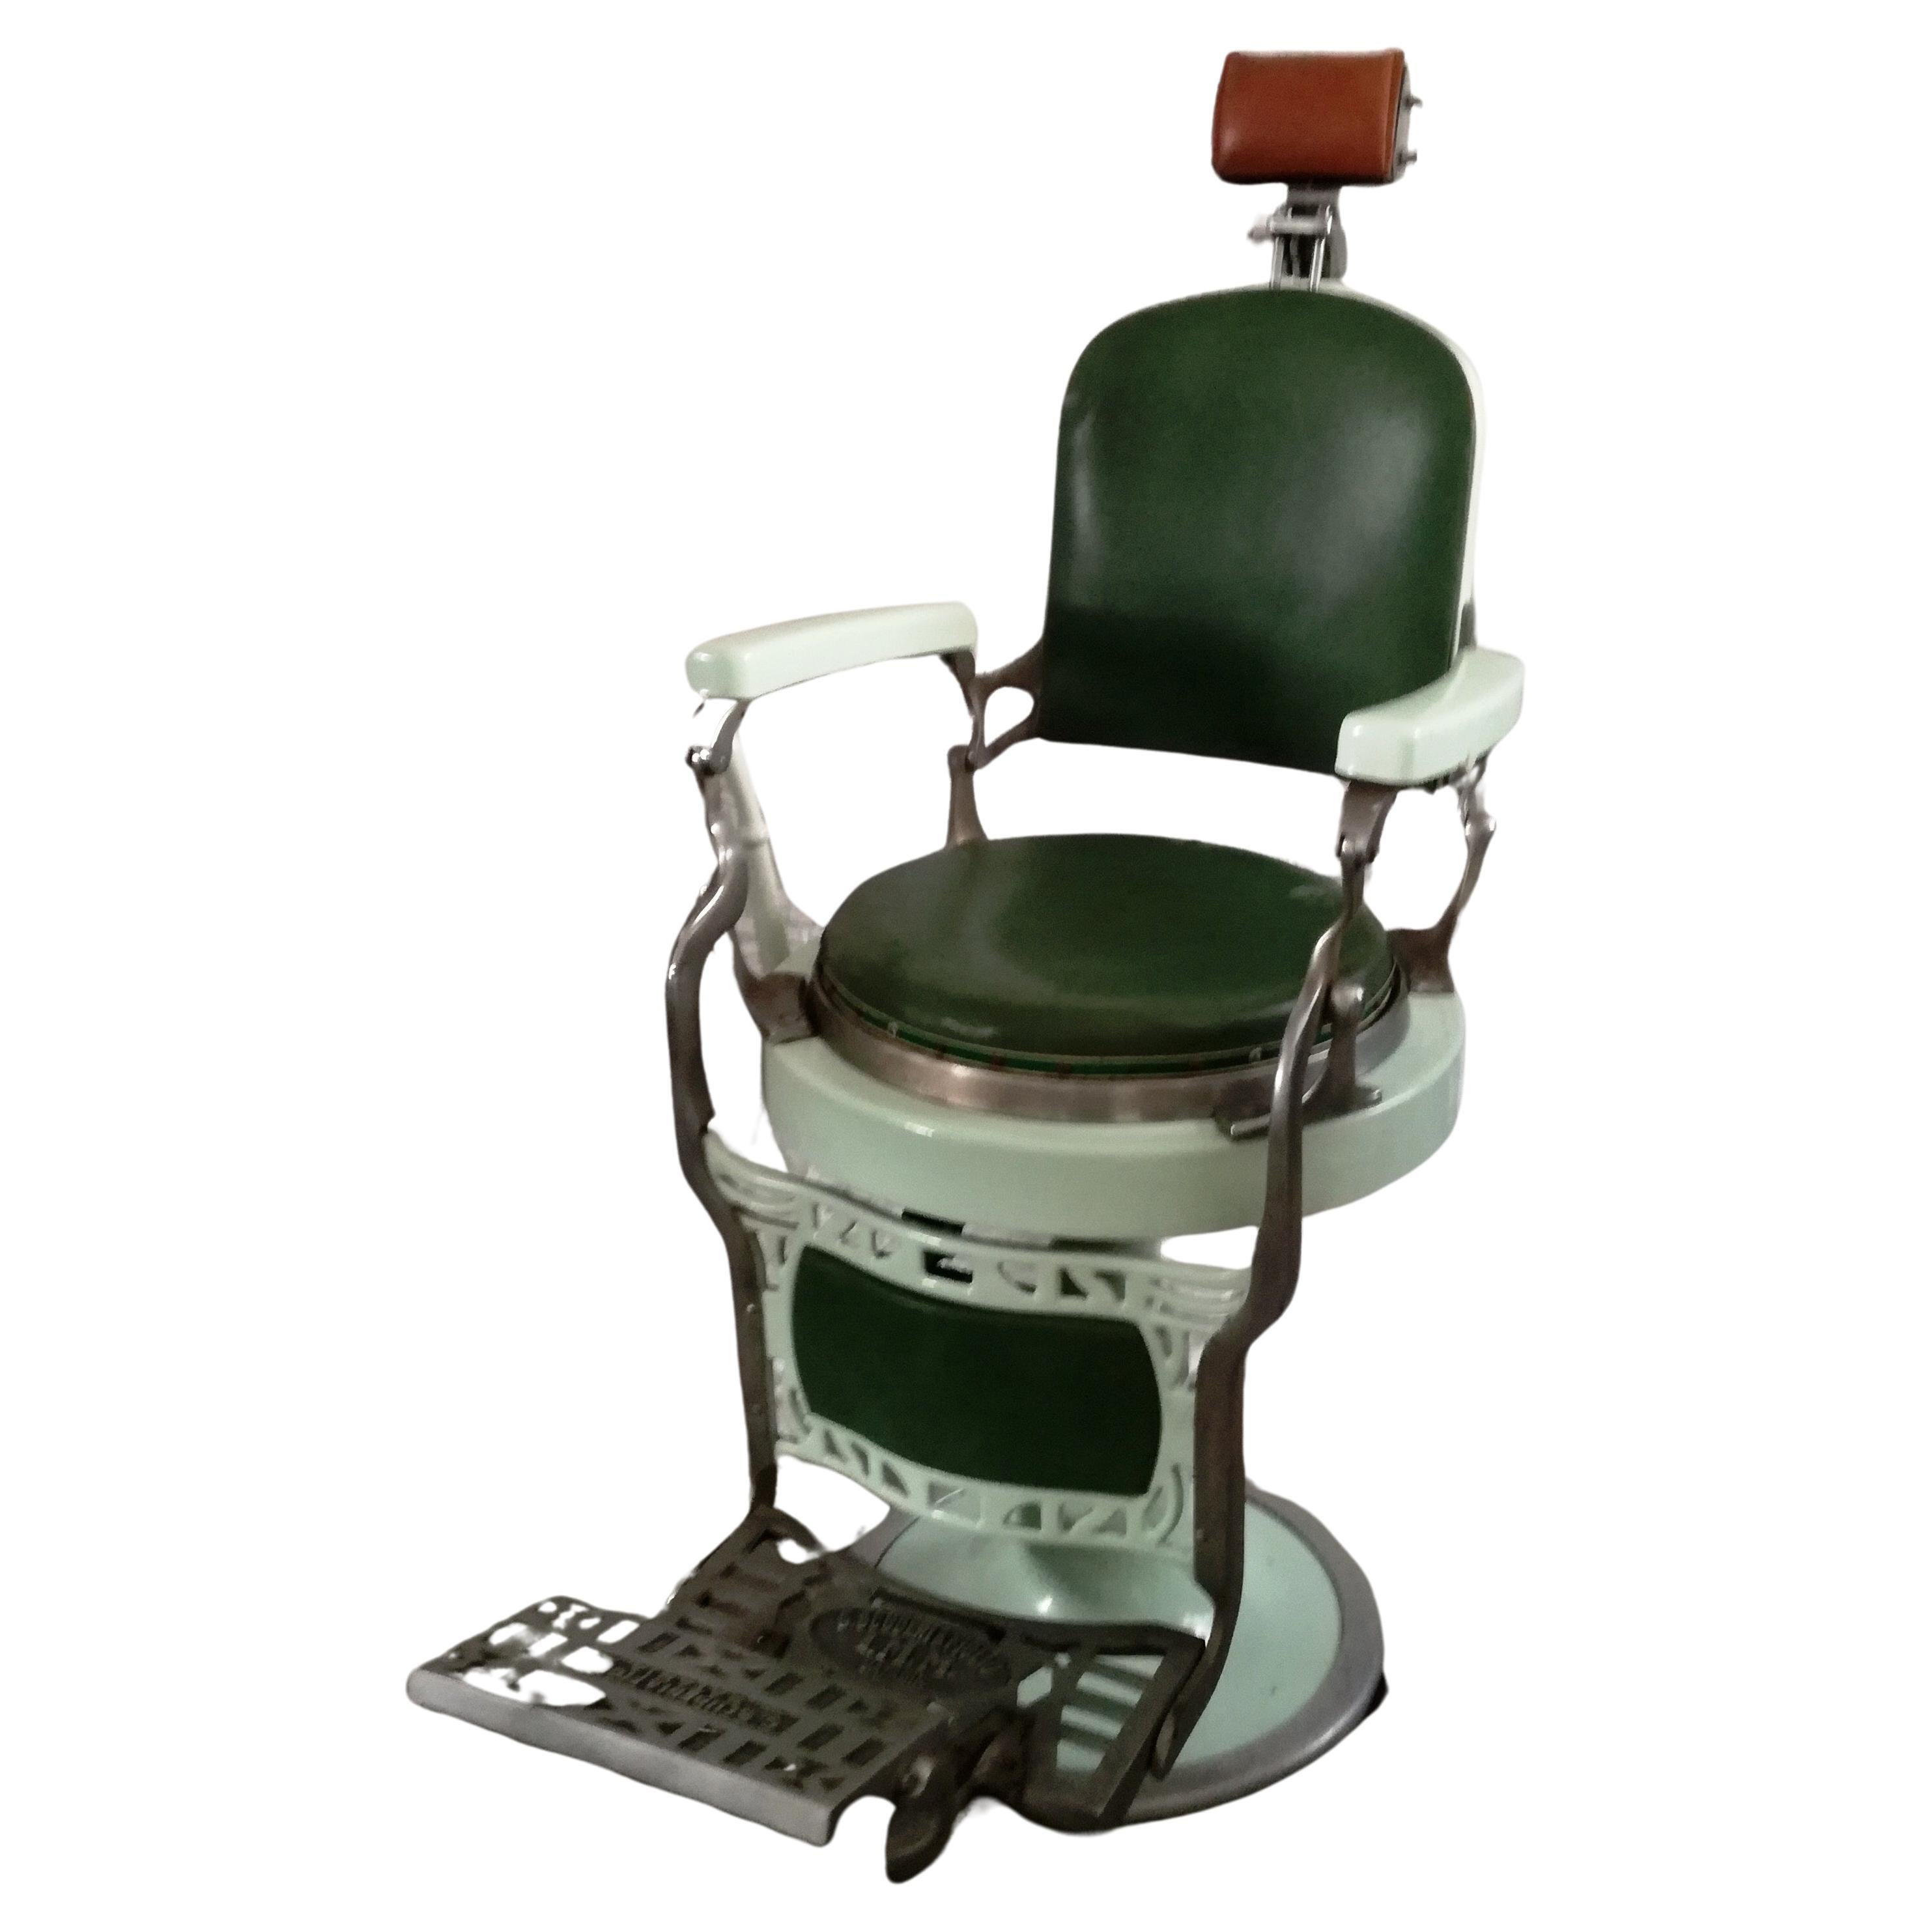 30s barber chair